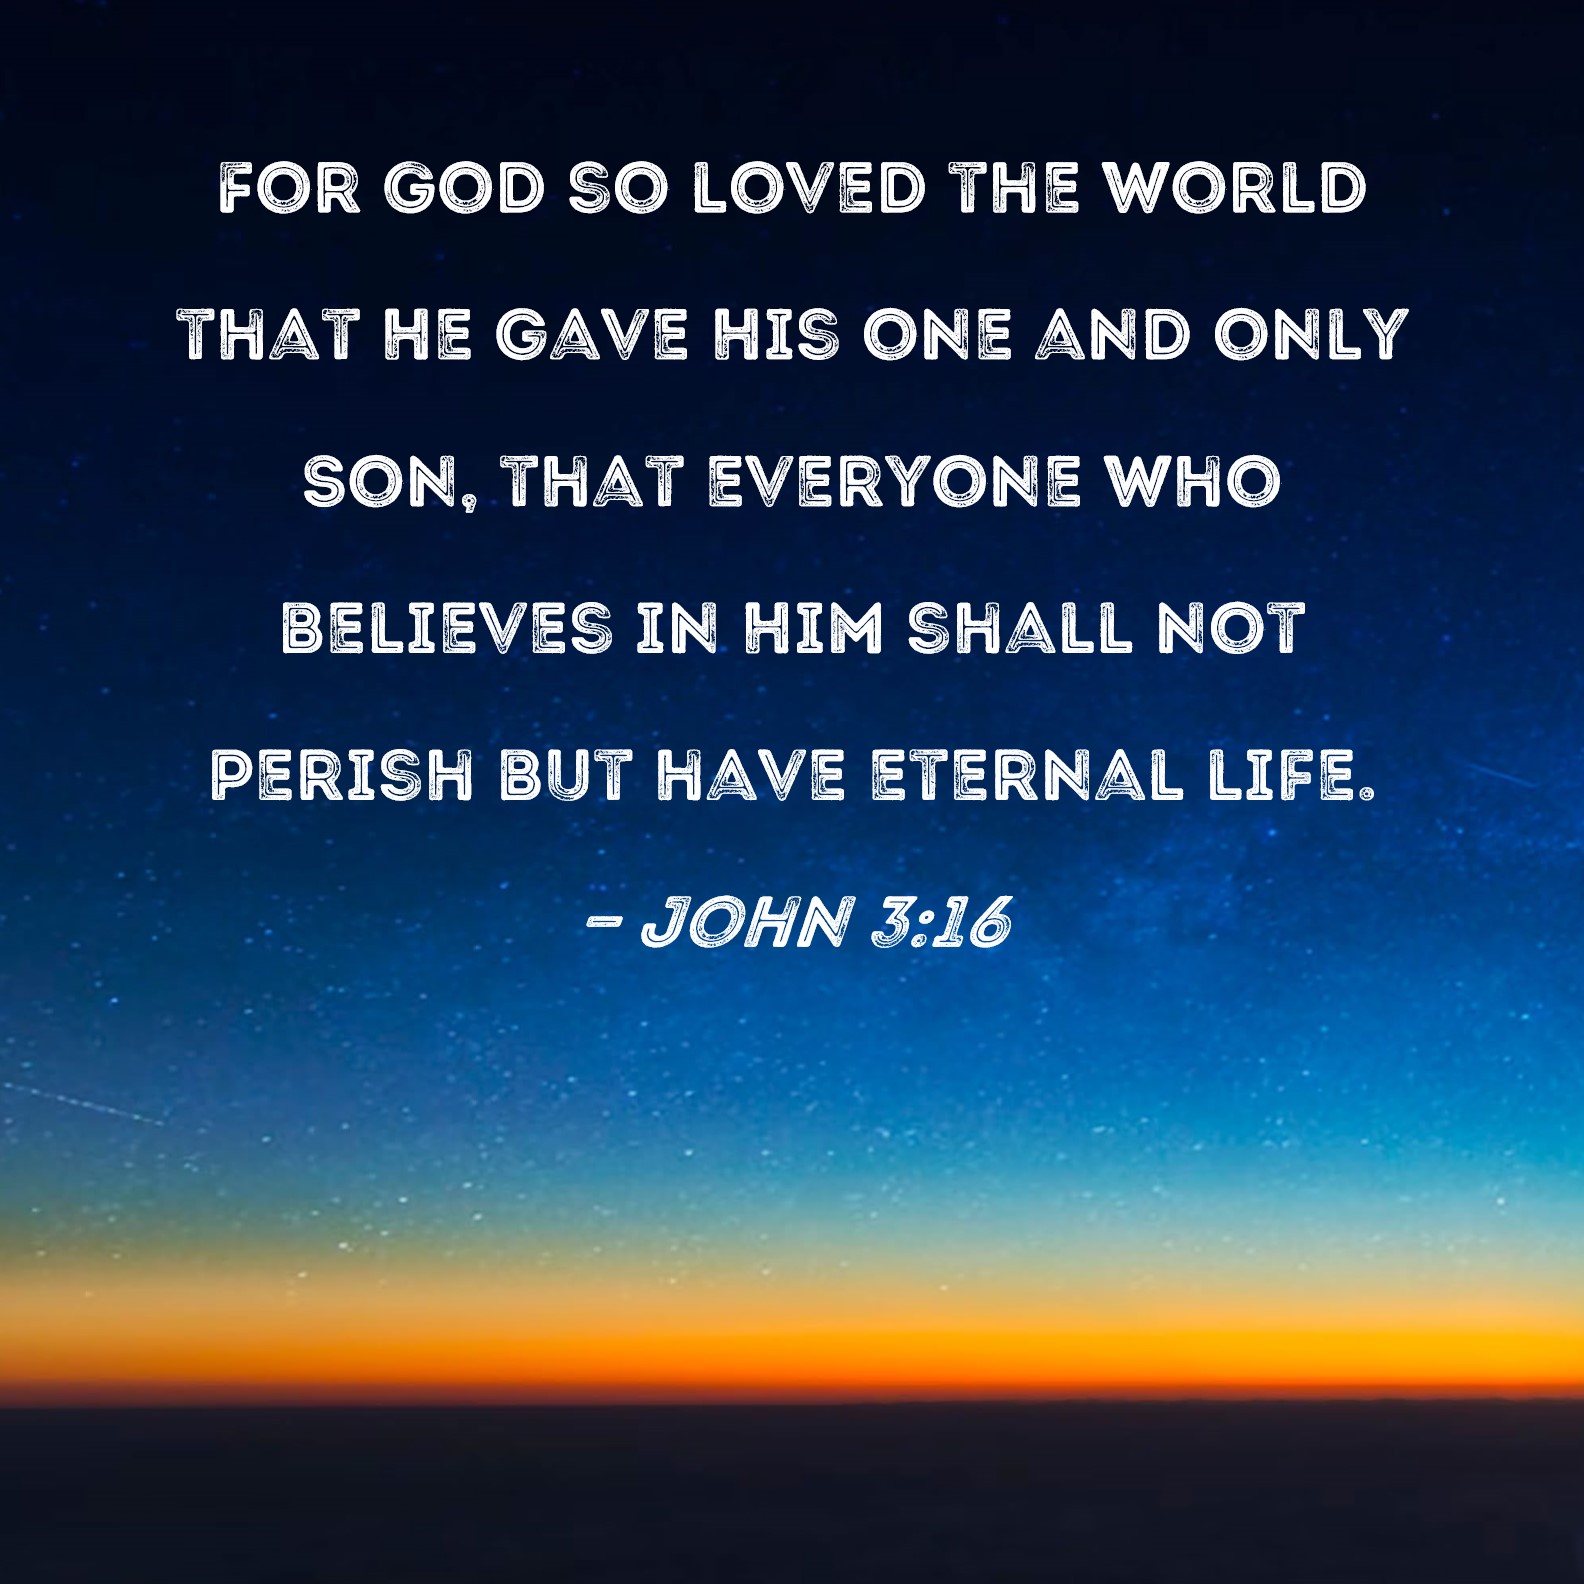 john-3-16-for-god-so-loved-the-world-that-he-gave-his-one-and-only-son